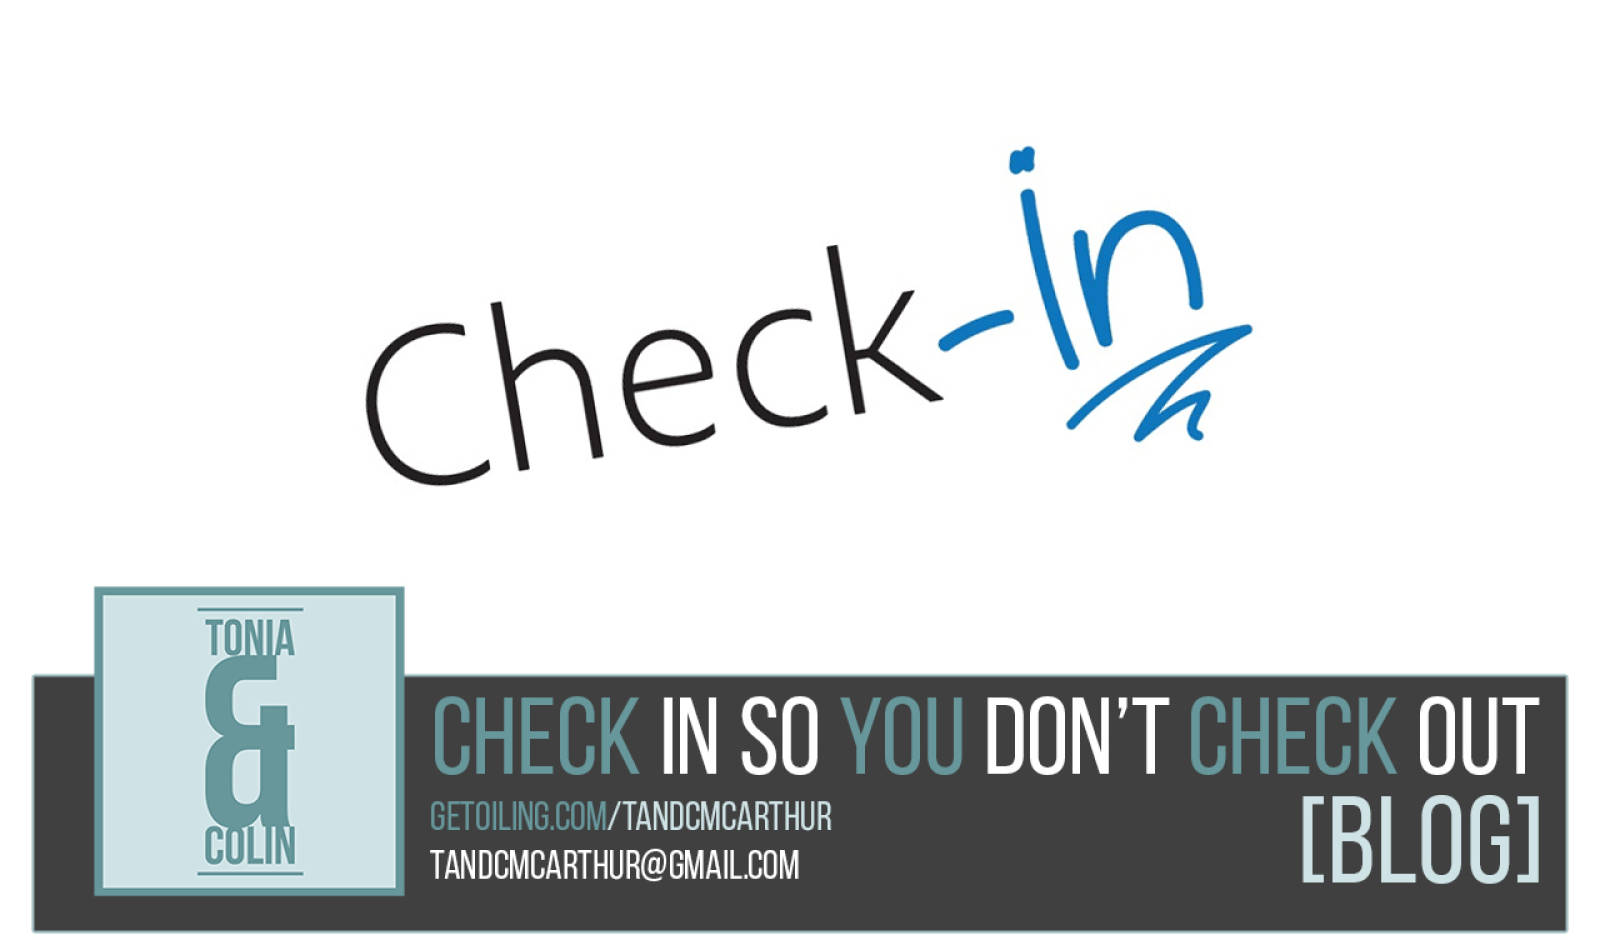 Check In So You Don't Check Out